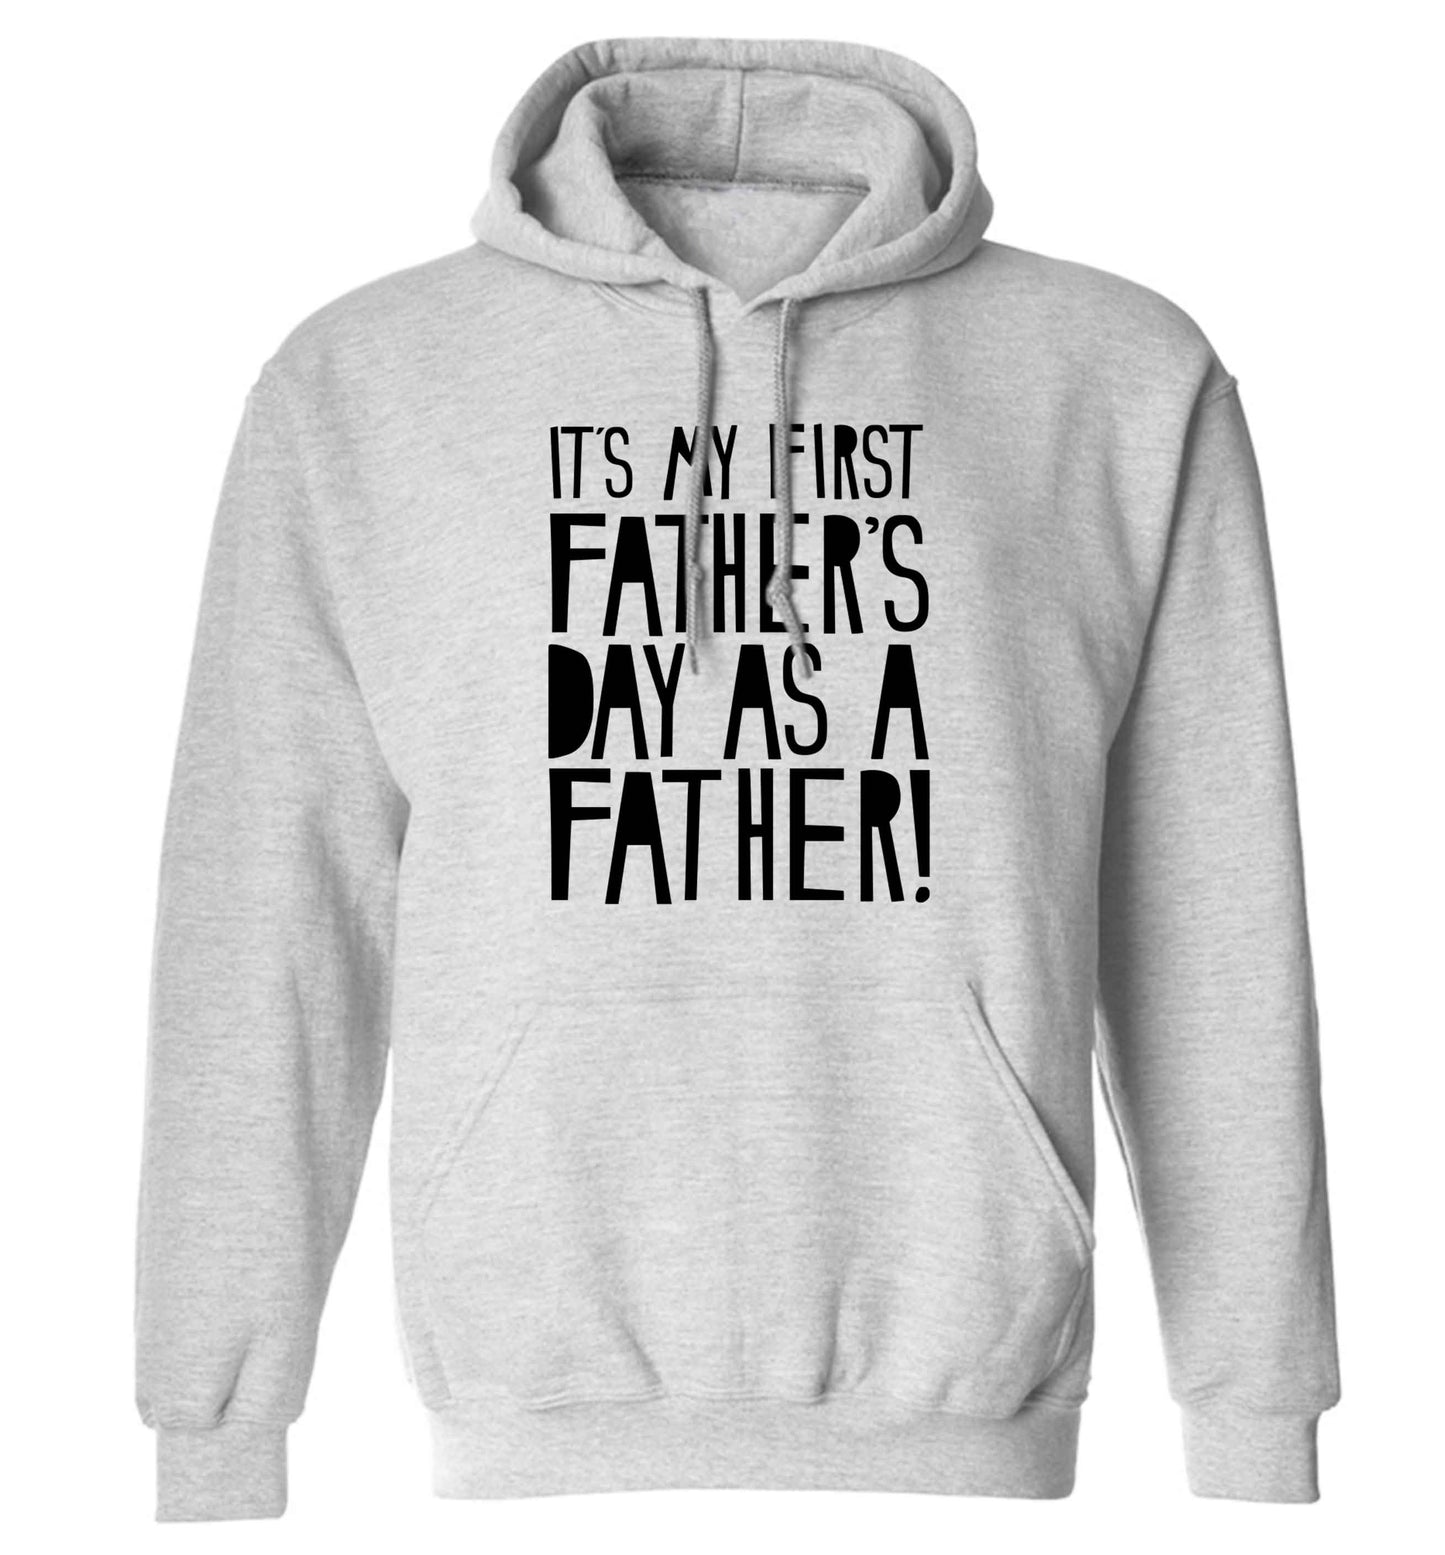 It's my first father's day as a father! adults unisex grey hoodie 2XL